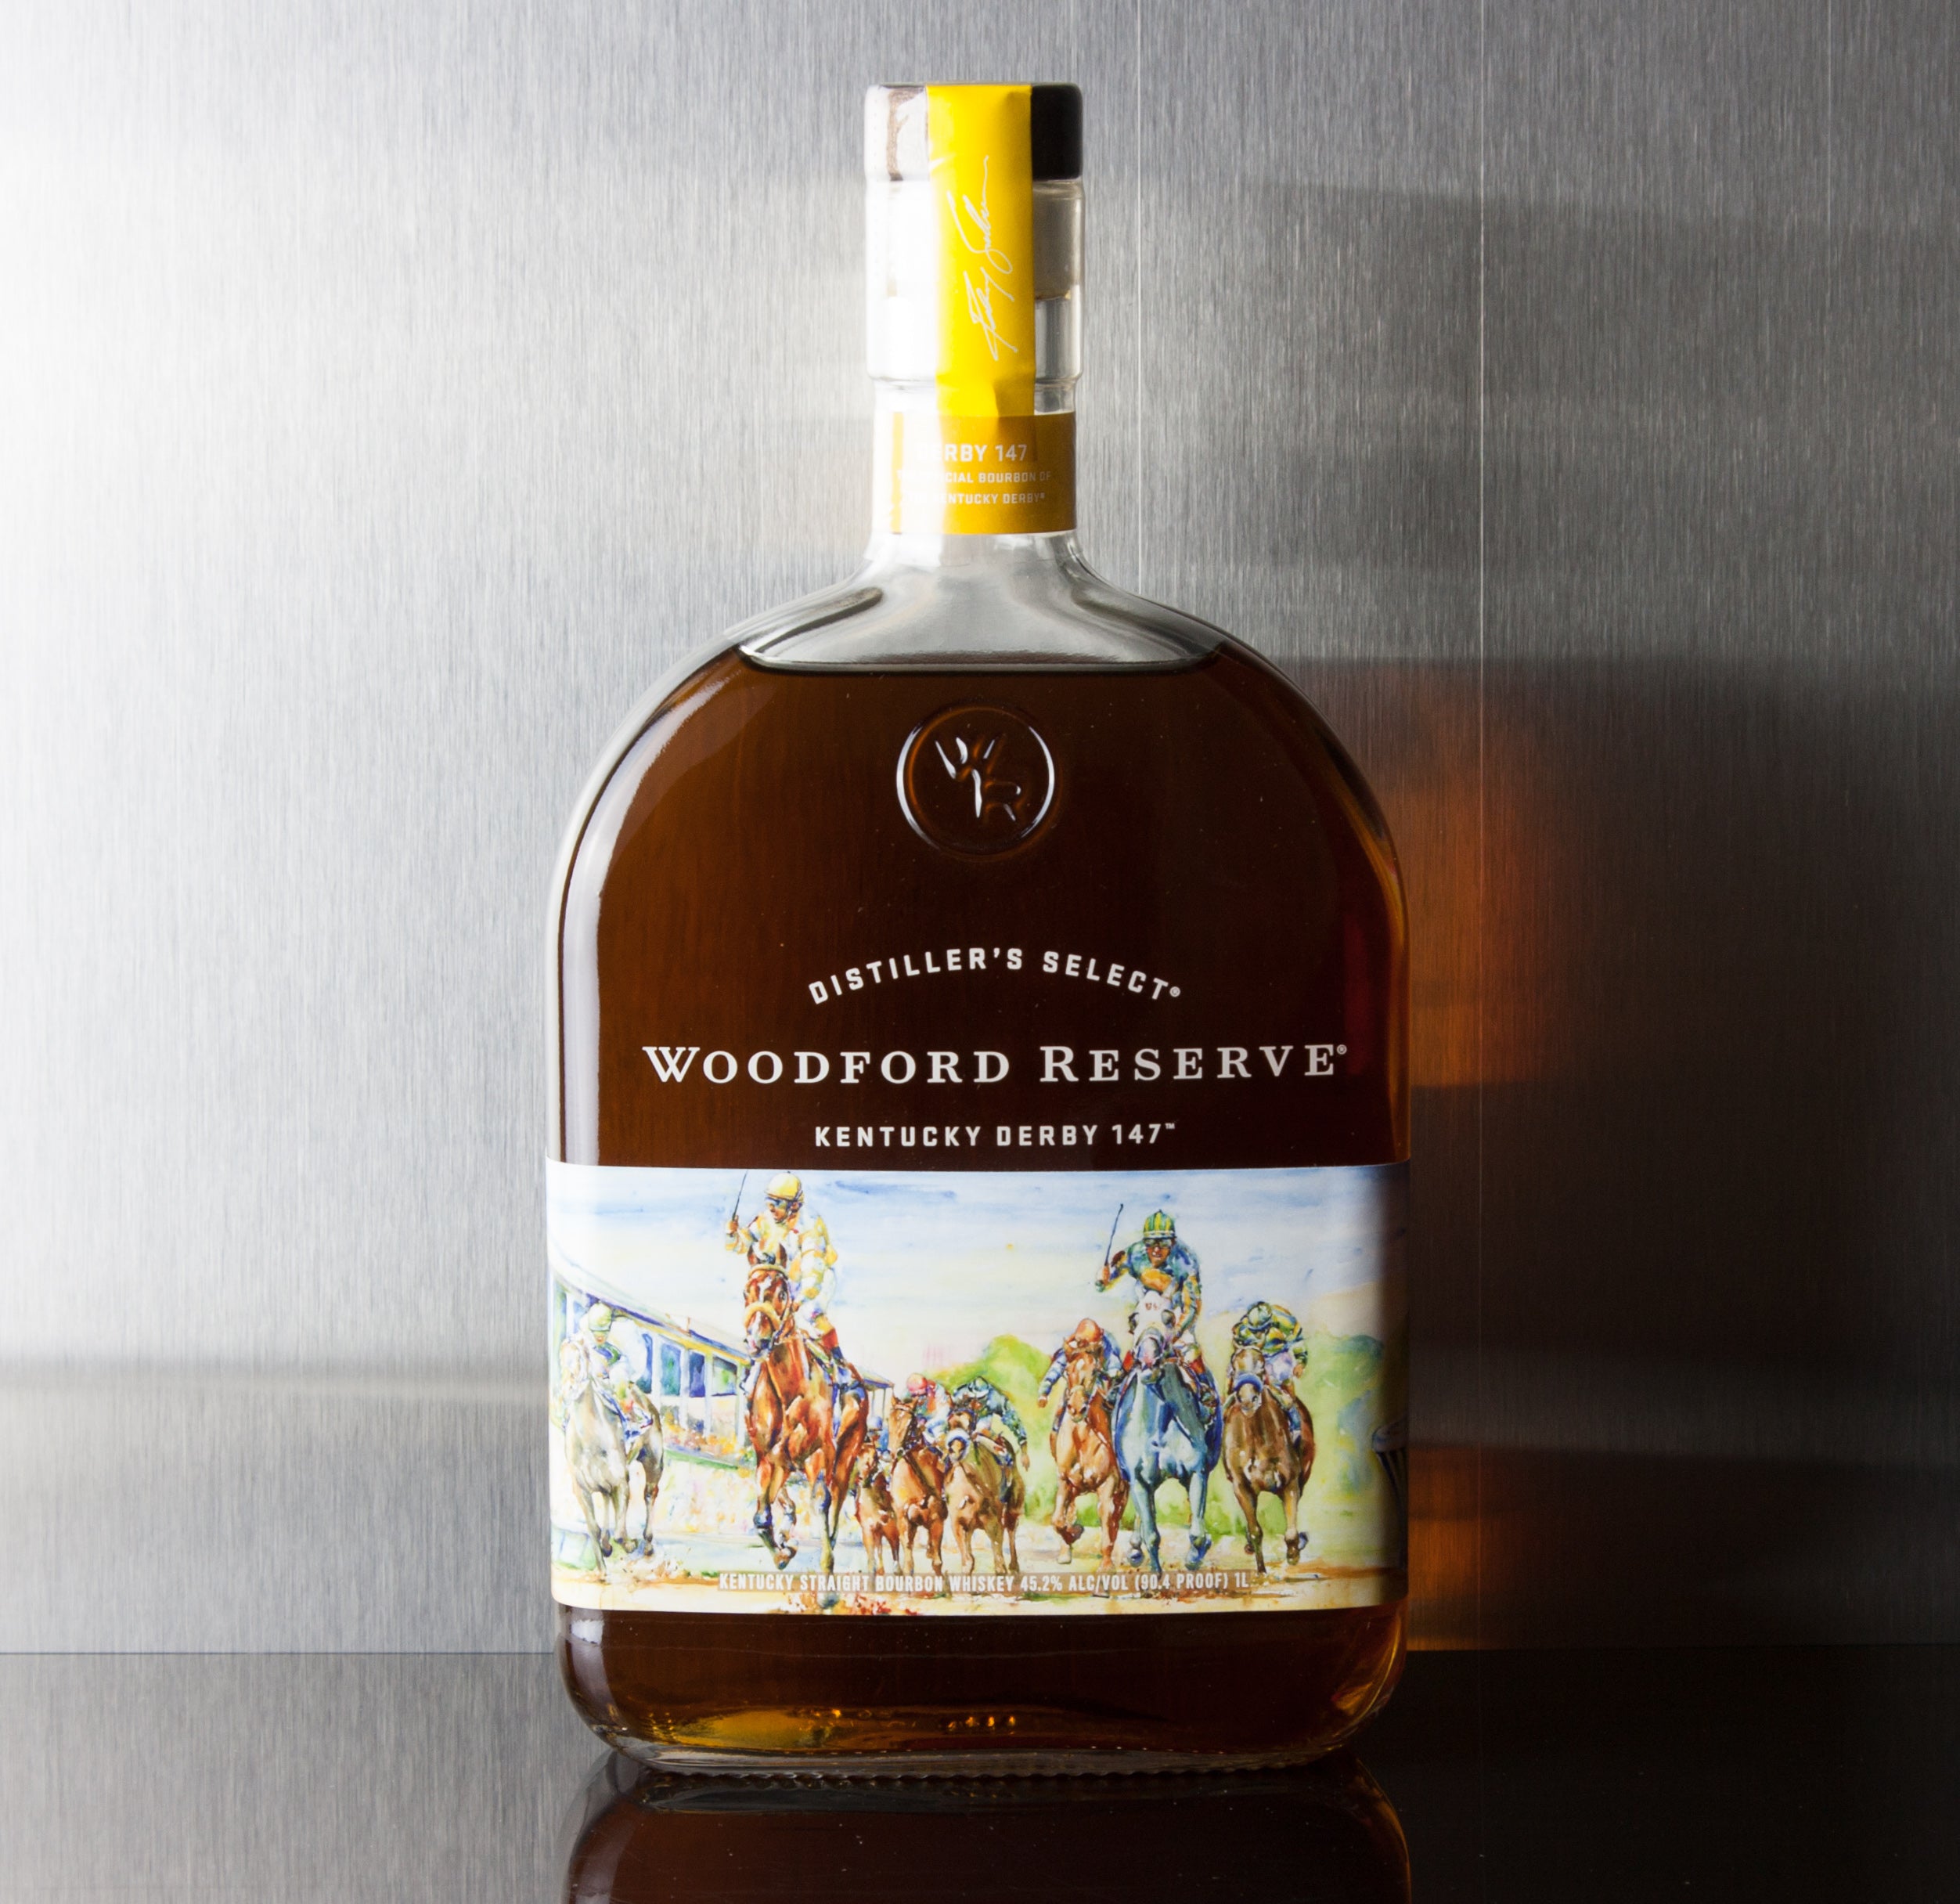 Woodford Reserve Kentucky Derby 147